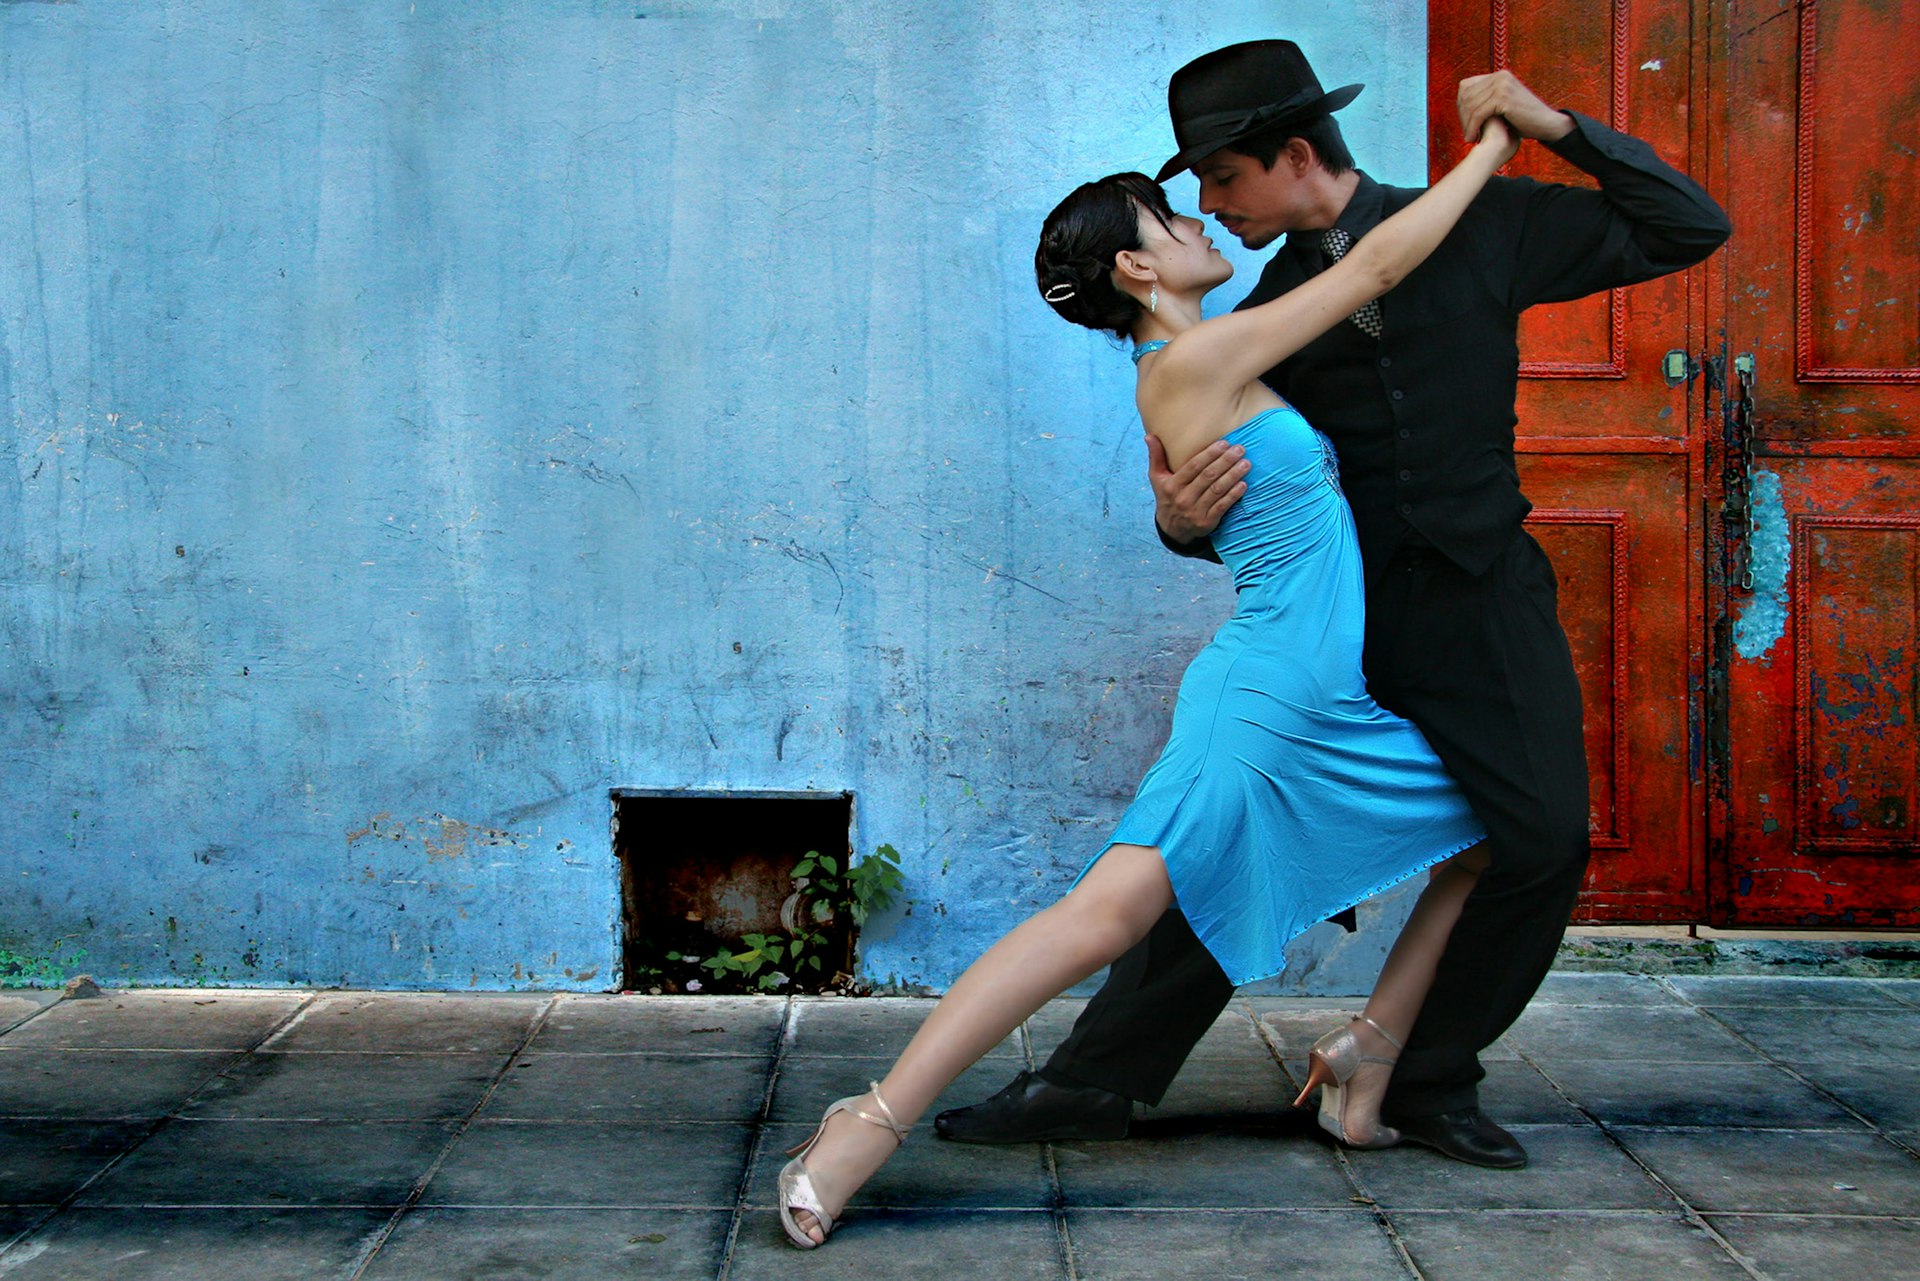 Two tango dancers pose together in front of a faded blue wall.